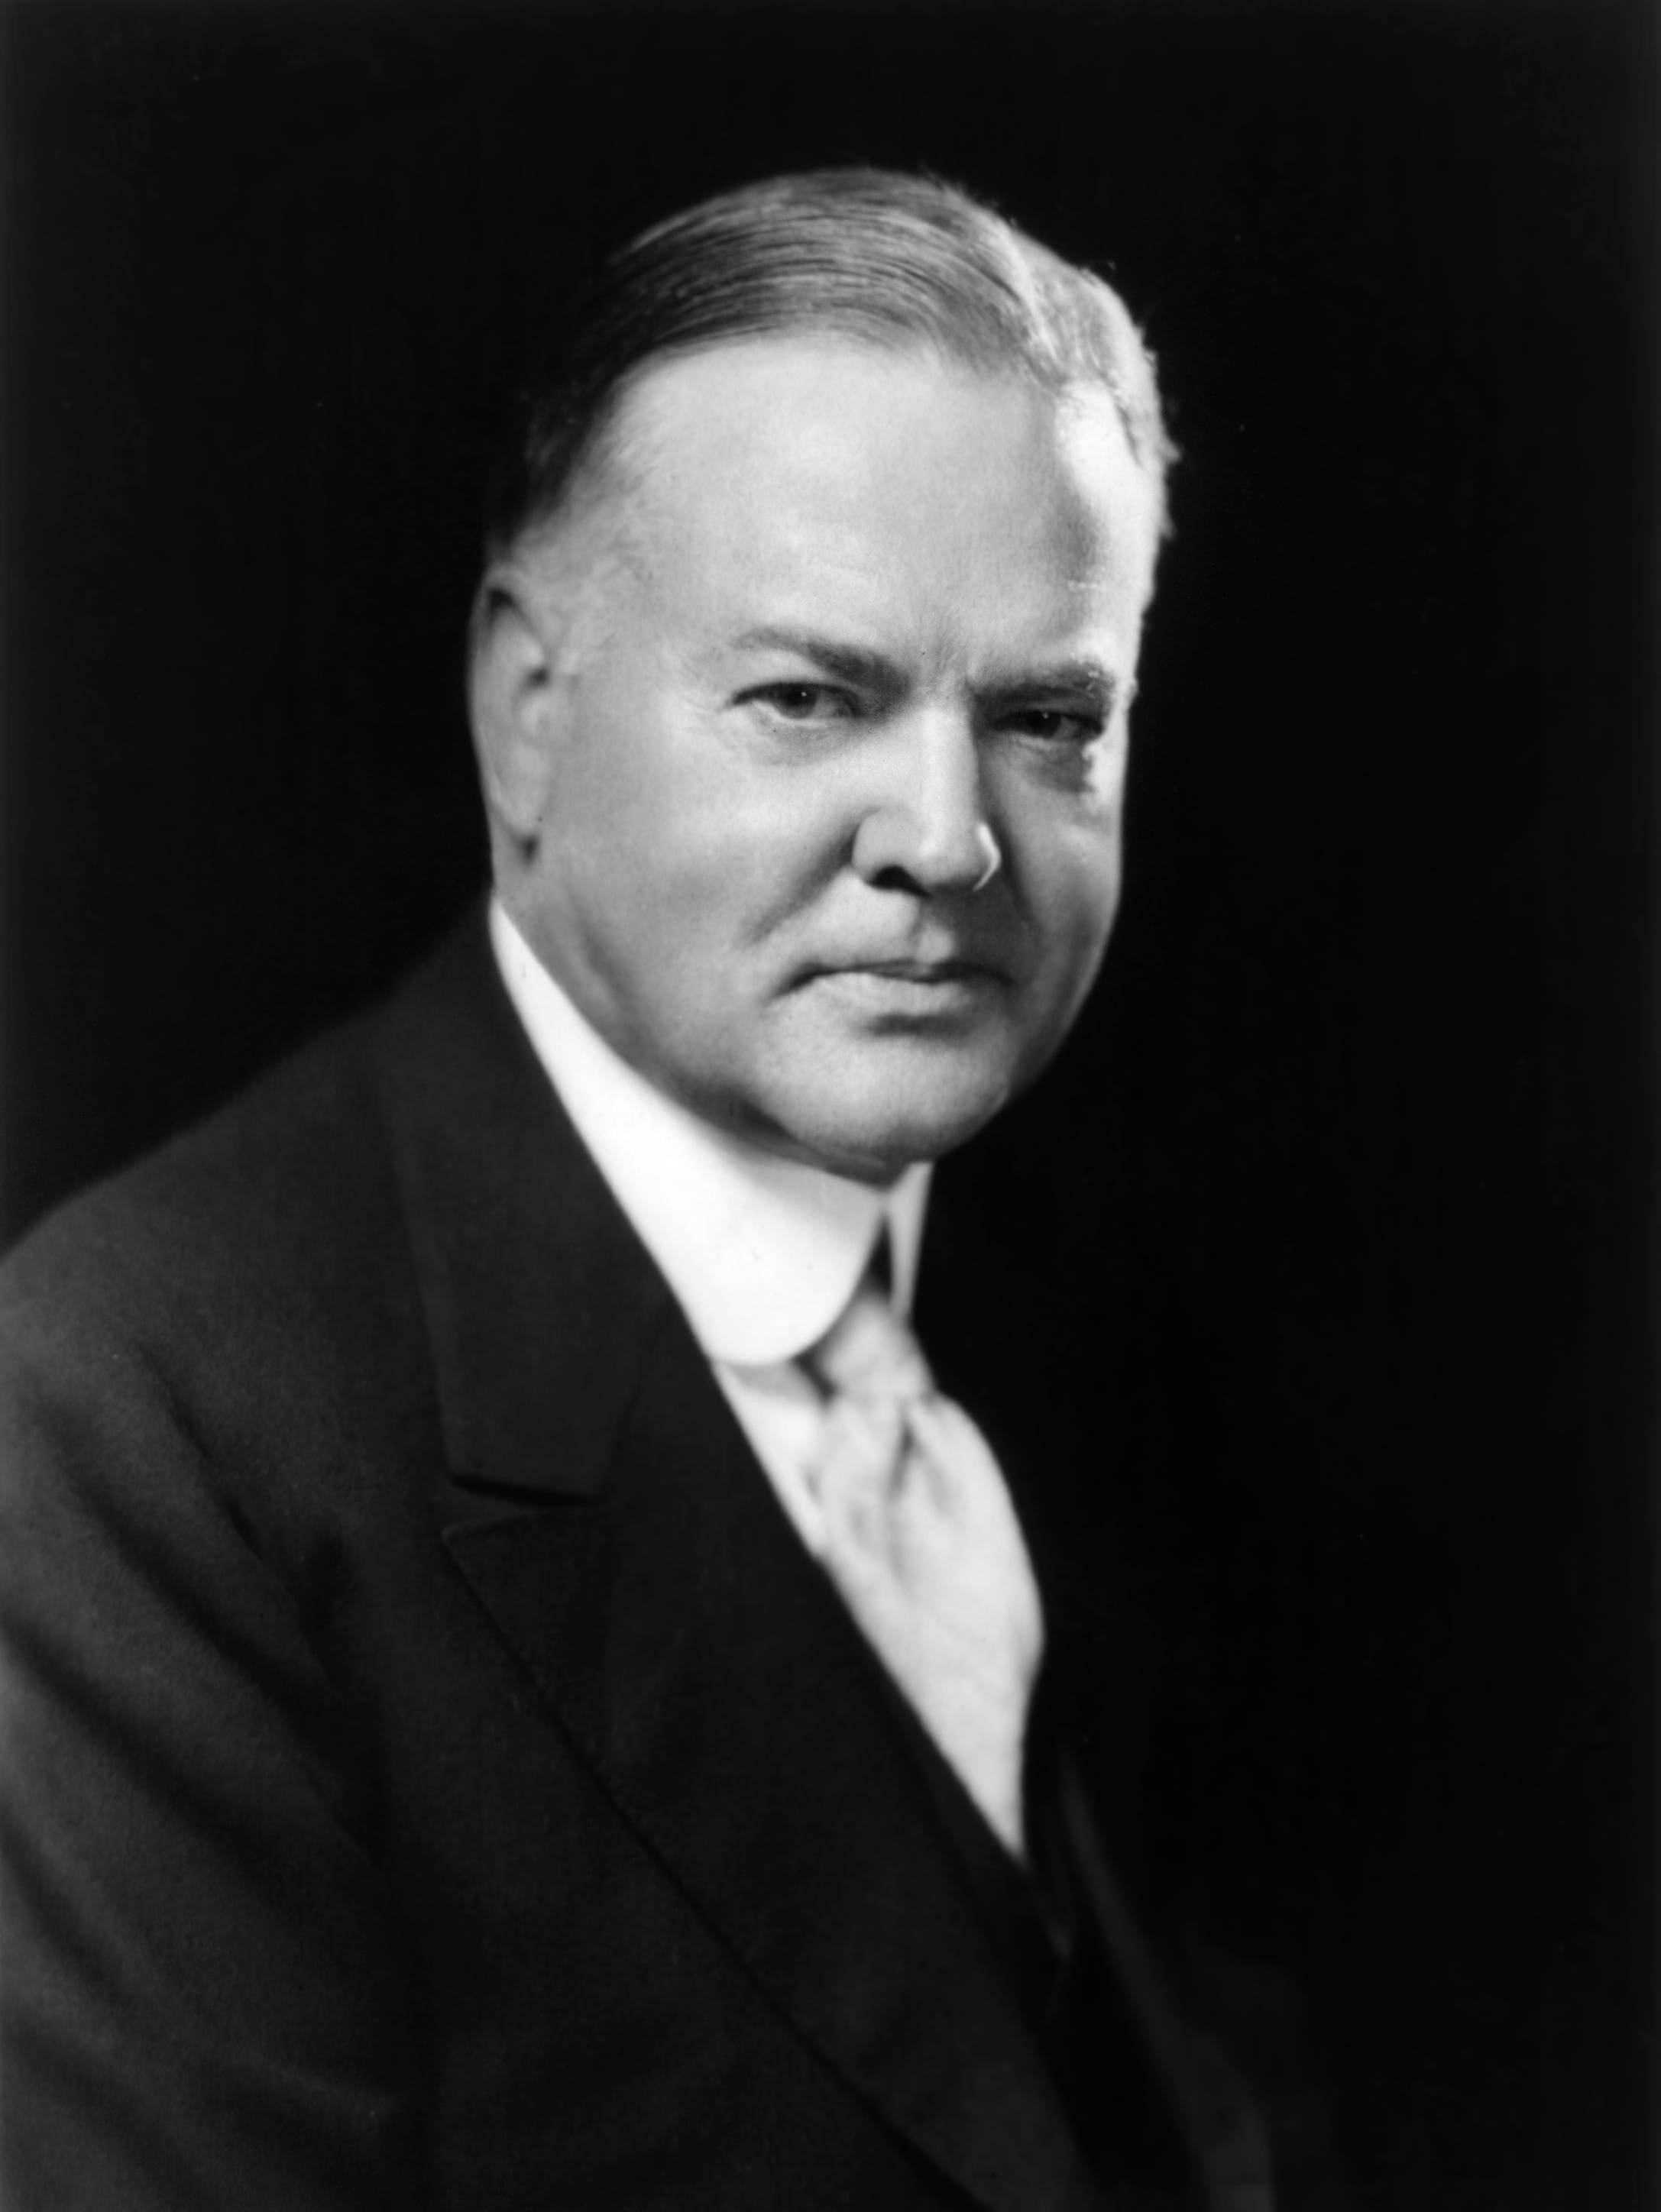 Herbert Hoover was sworn in as the 31st President of the United States on March 4, 1929 